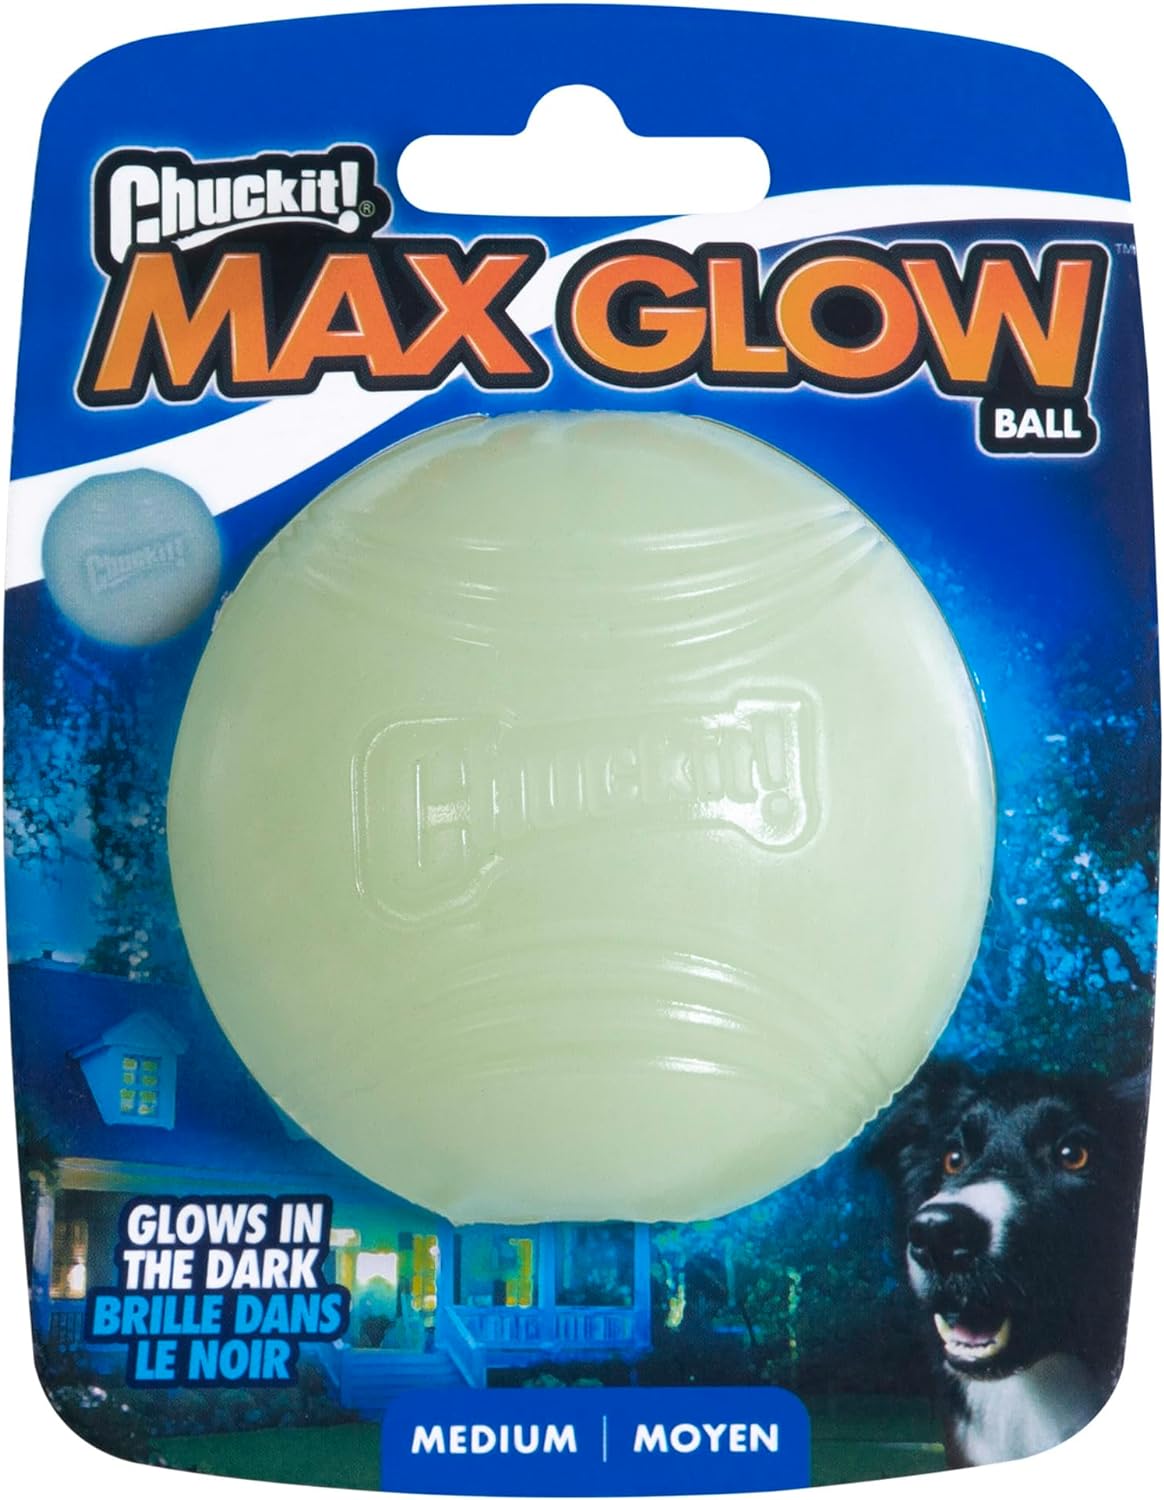 Chuckit Max Glow Ball Dog Toy, Medium (2.5 Inch Diameter) for dogs 20-60 lbs, Pack of 1